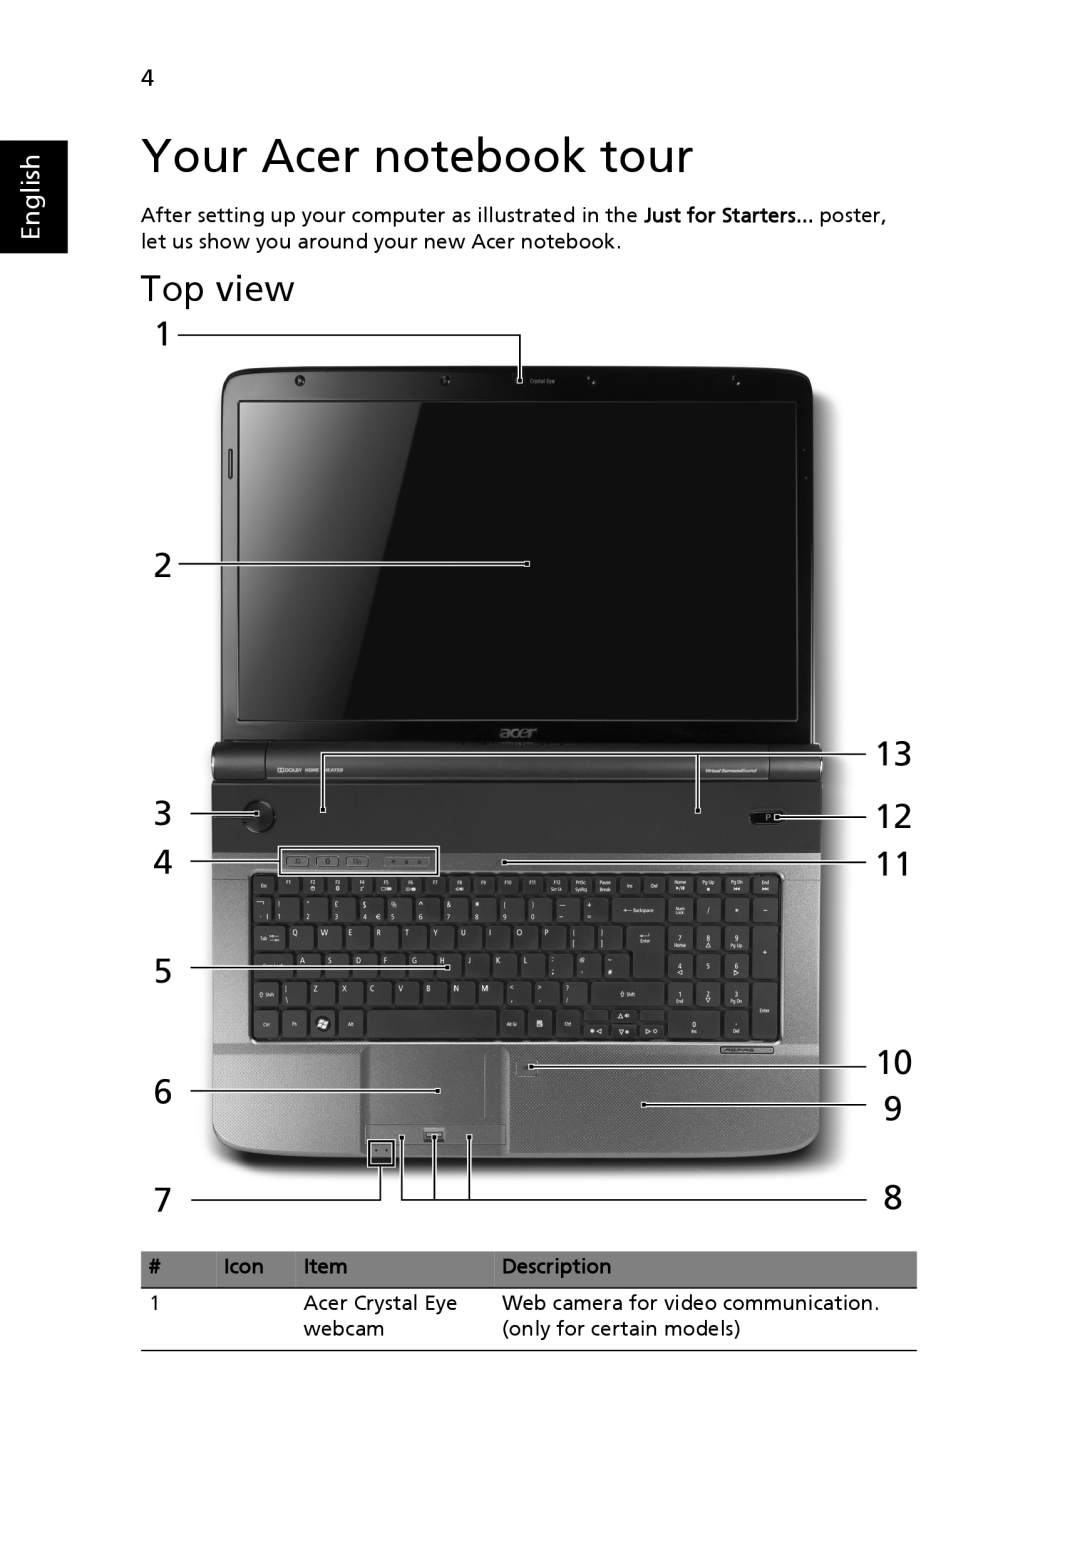 Acer 7540 Series manual Your Acer notebook tour, Top view, English 